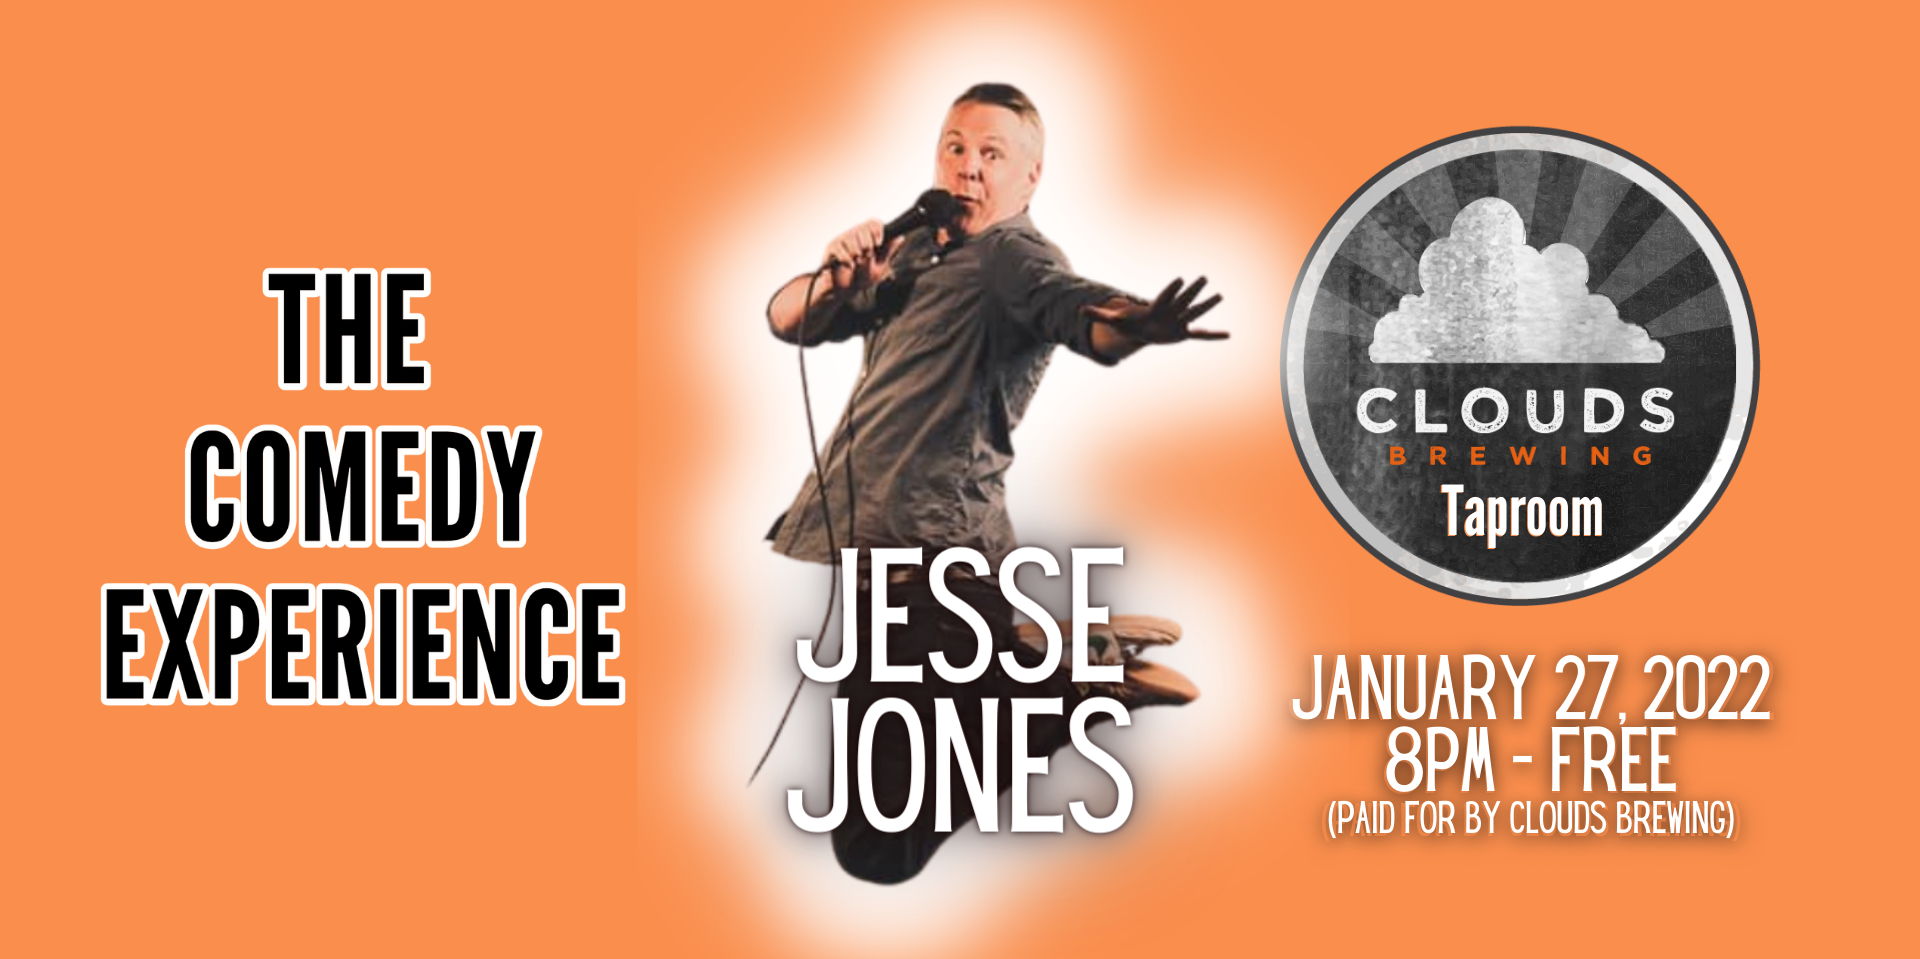 The Comedy Experience: JESSE JONES @ The Taproom in Raleigh promotional image